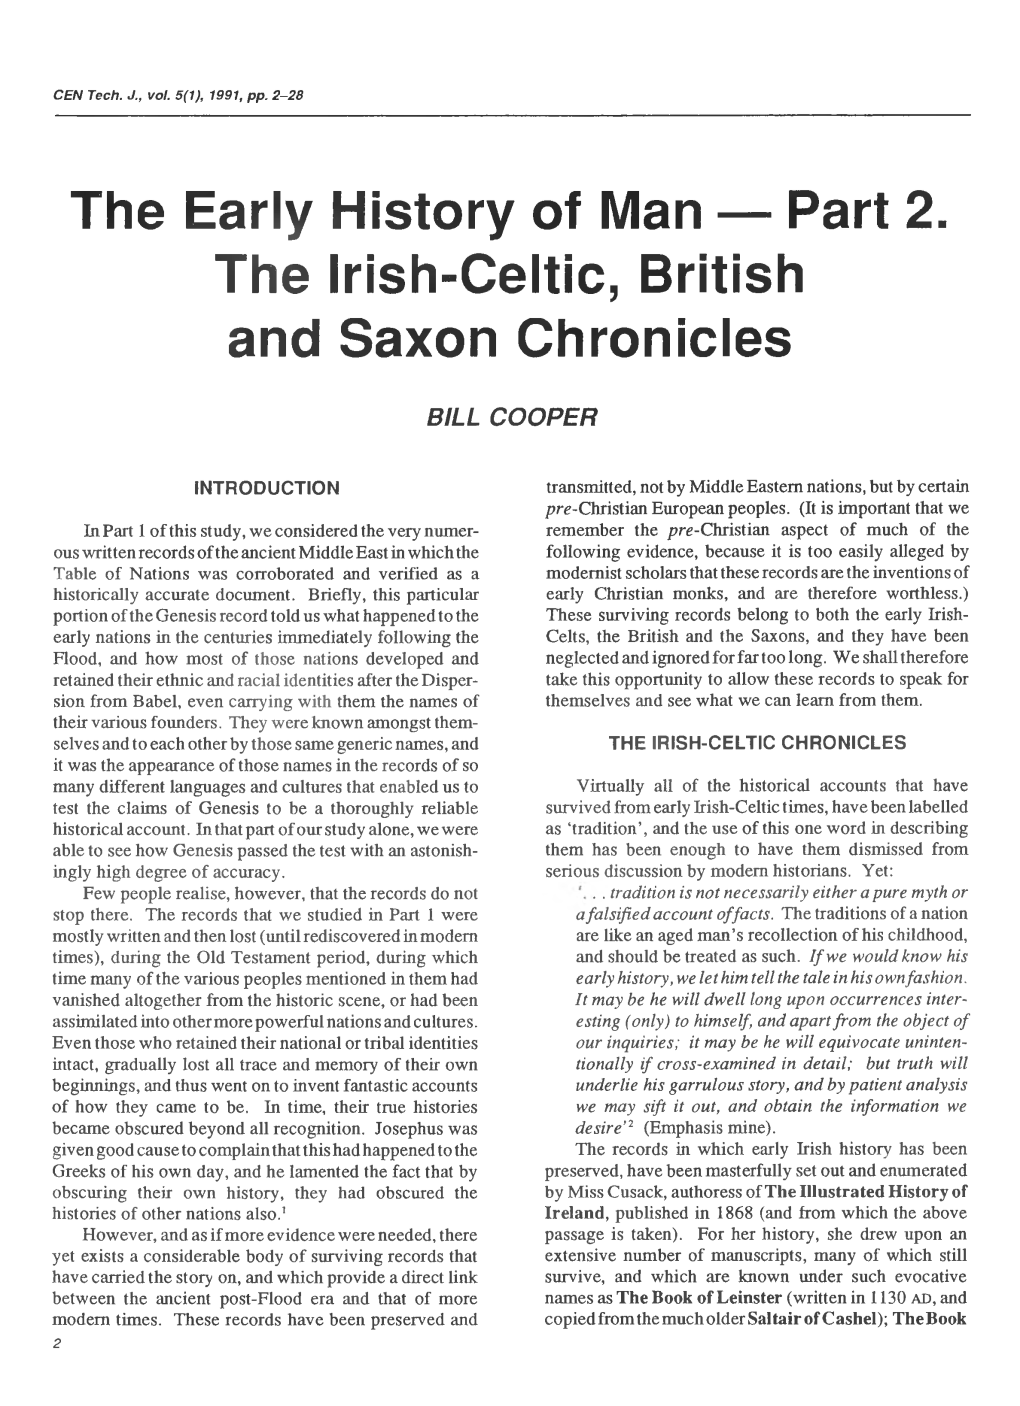 The Early History of Man — Part 2. the Irish-Celtic, British and Saxon Chronicles